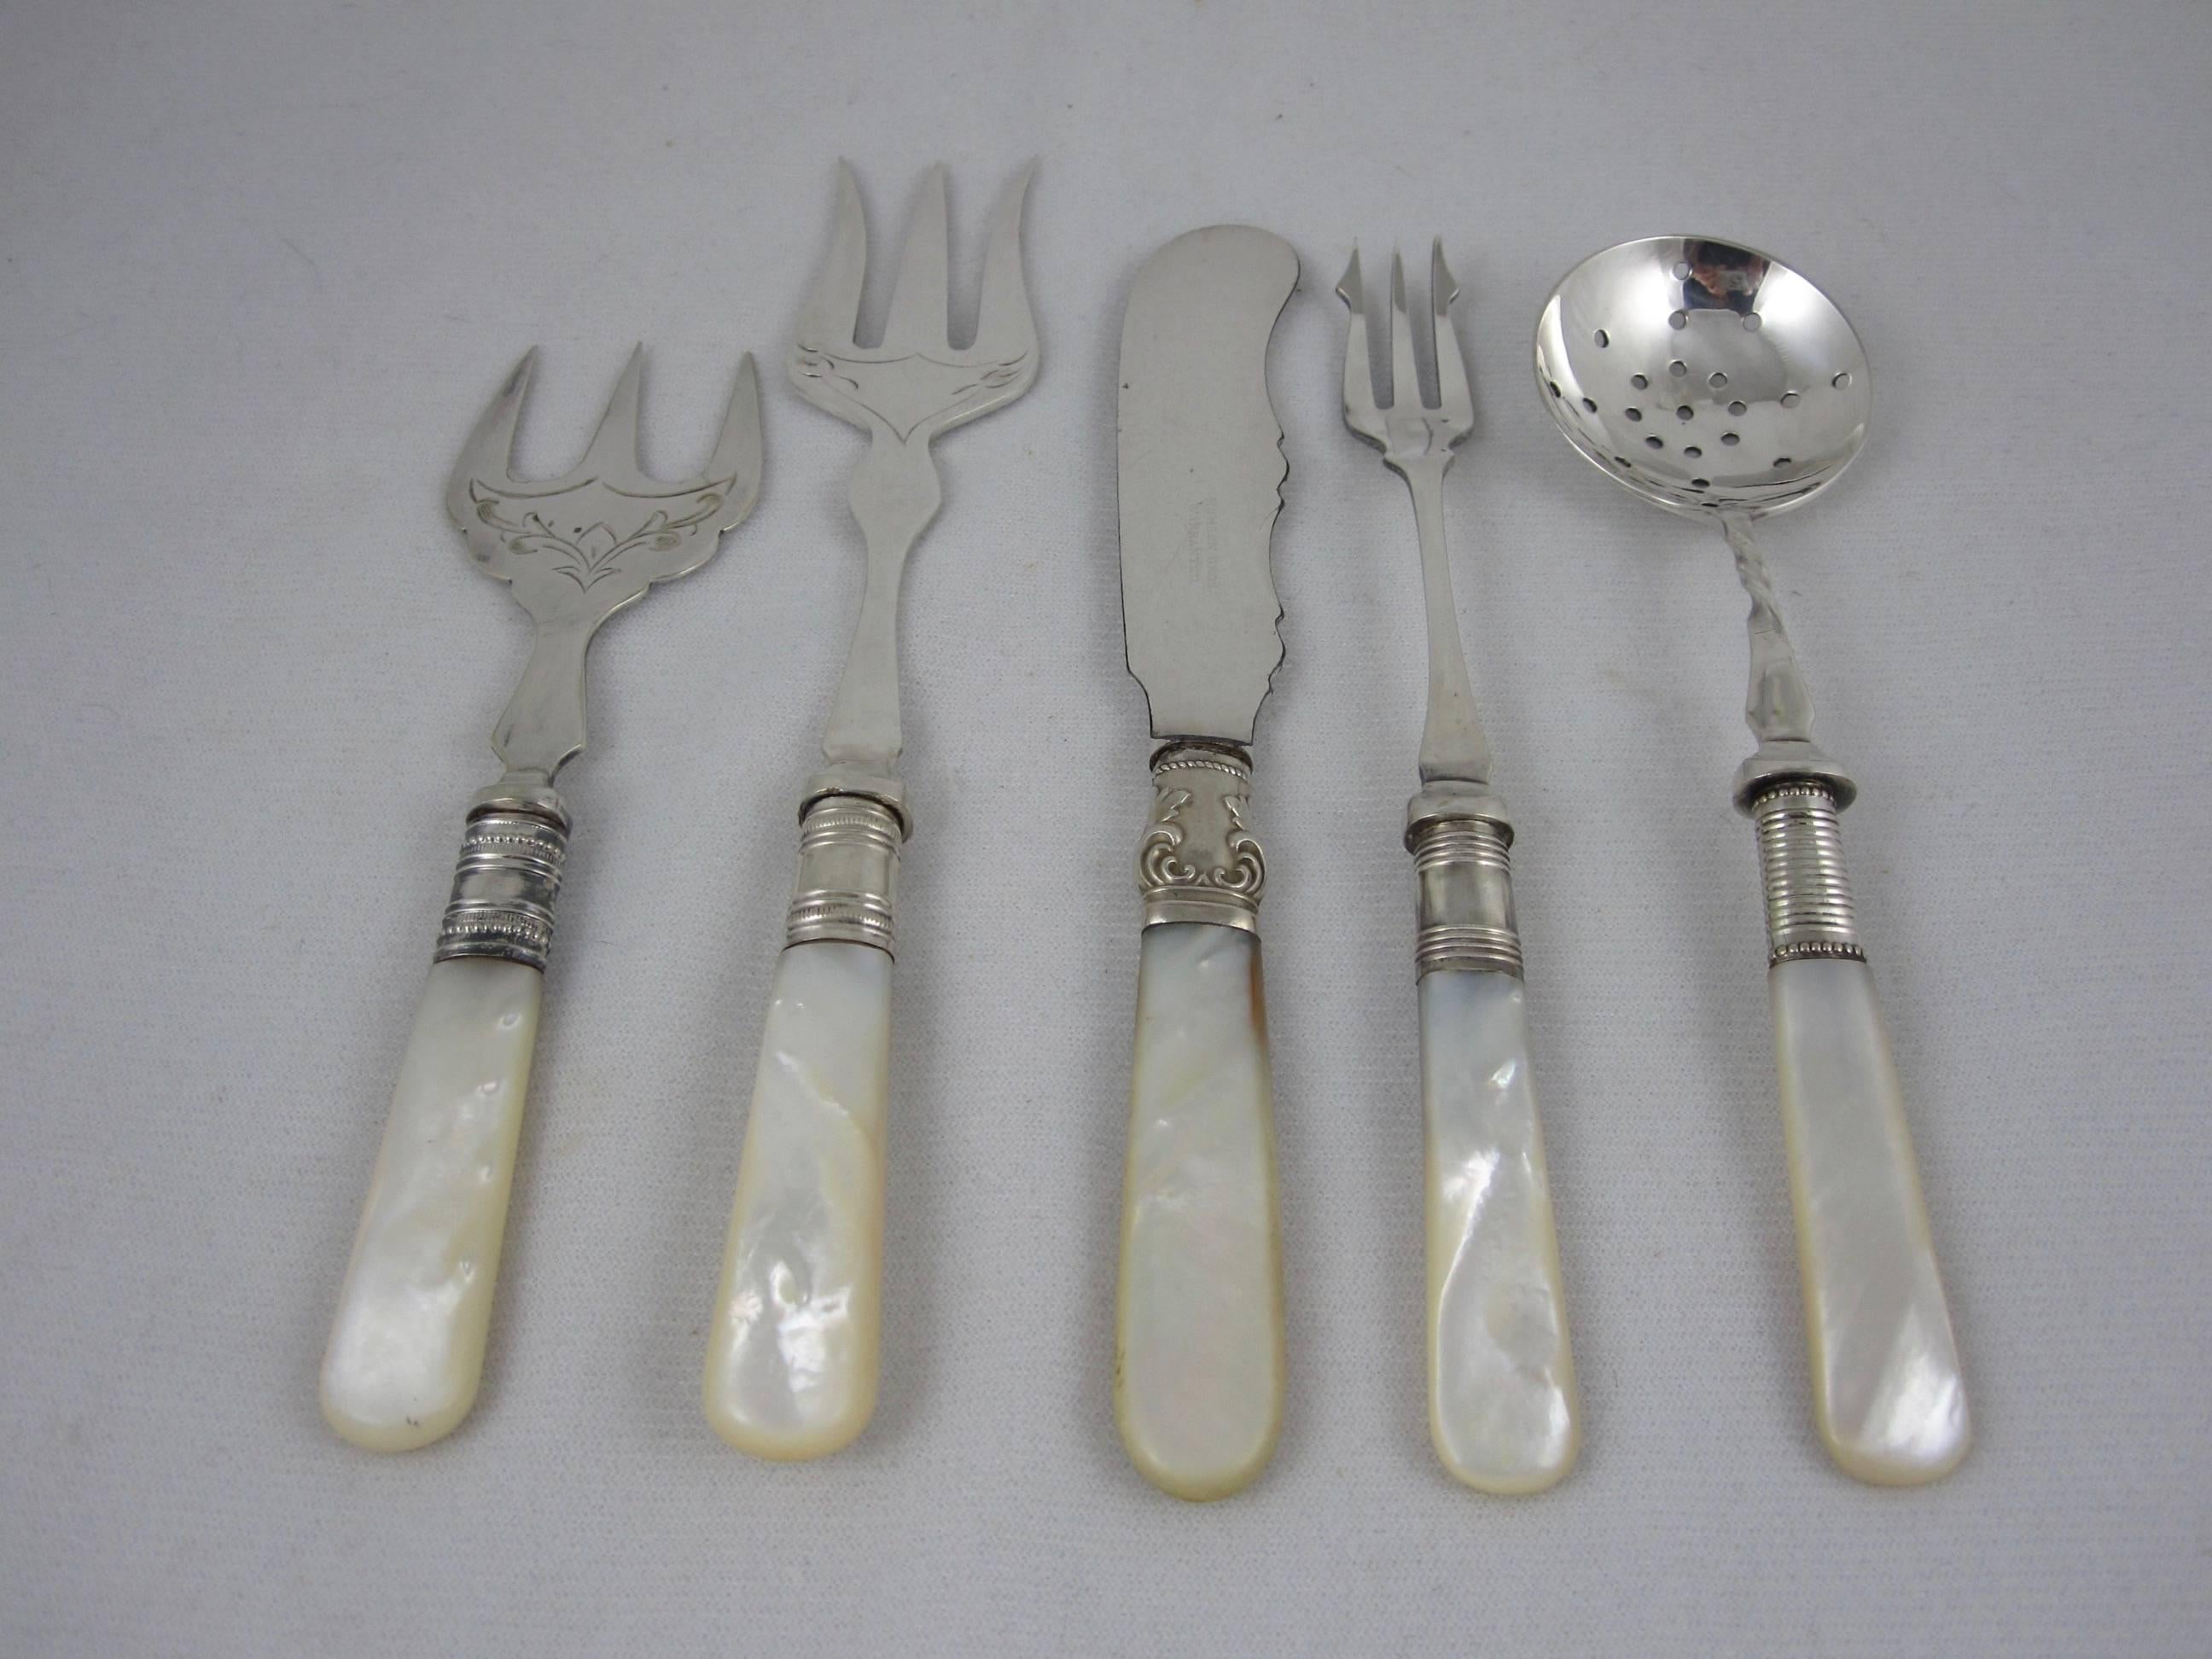 An assortment of English mother-of-pearl handled, sterling silver and silver plated servers, circa 1880-1910. Set of five.

One pierced spoon with a twisted stem, marked EPNS, 6″ L x 1.5″ W x .50″ H.
One spreader, sterling silver collar, blade